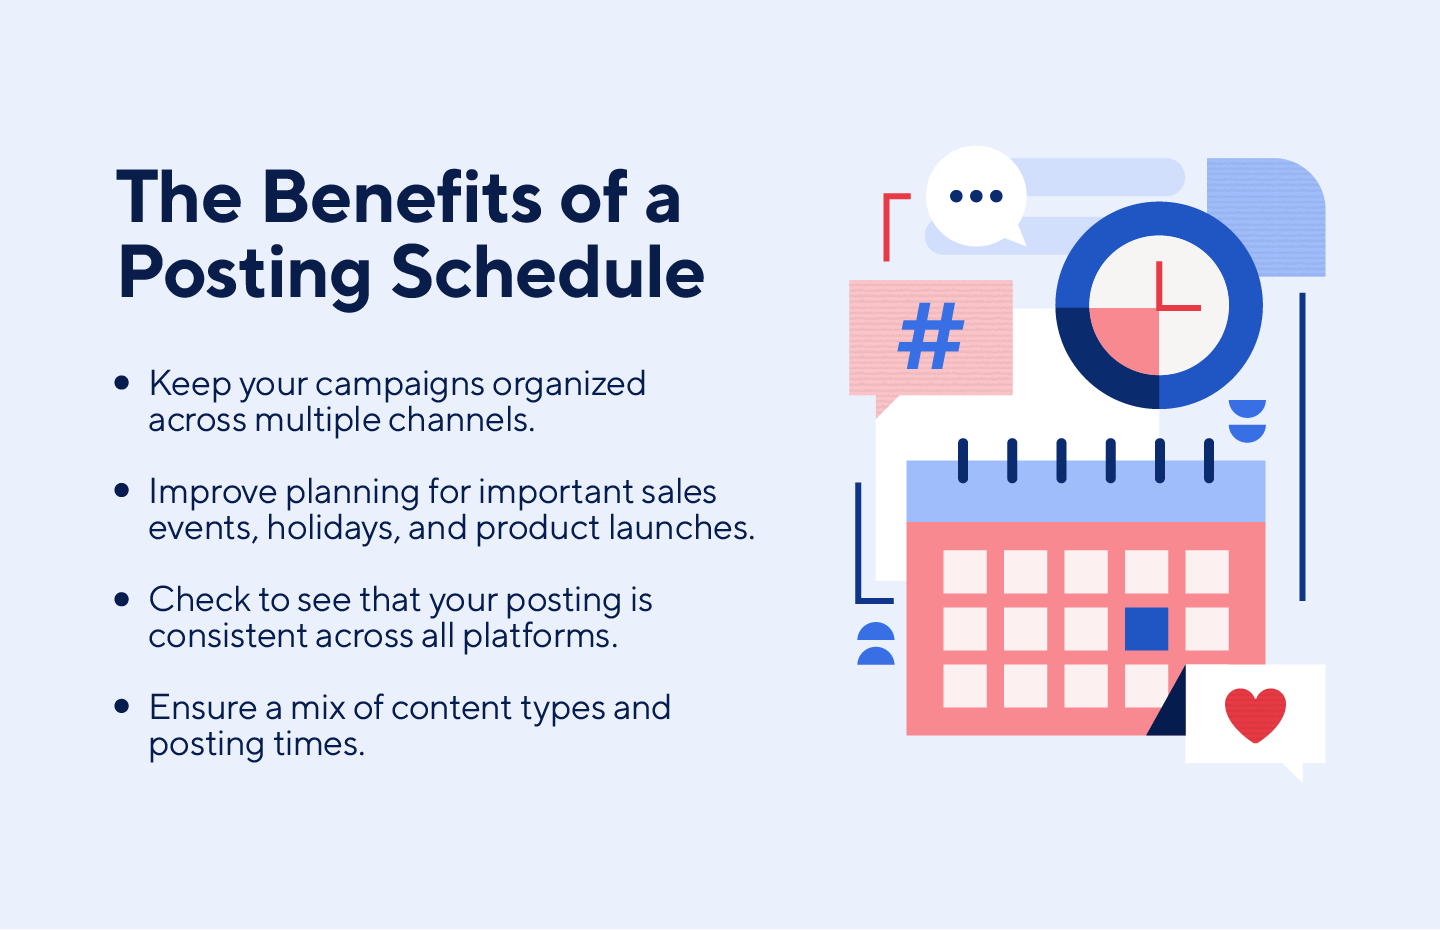 The benefits of a posting schedule include consistency and organization.